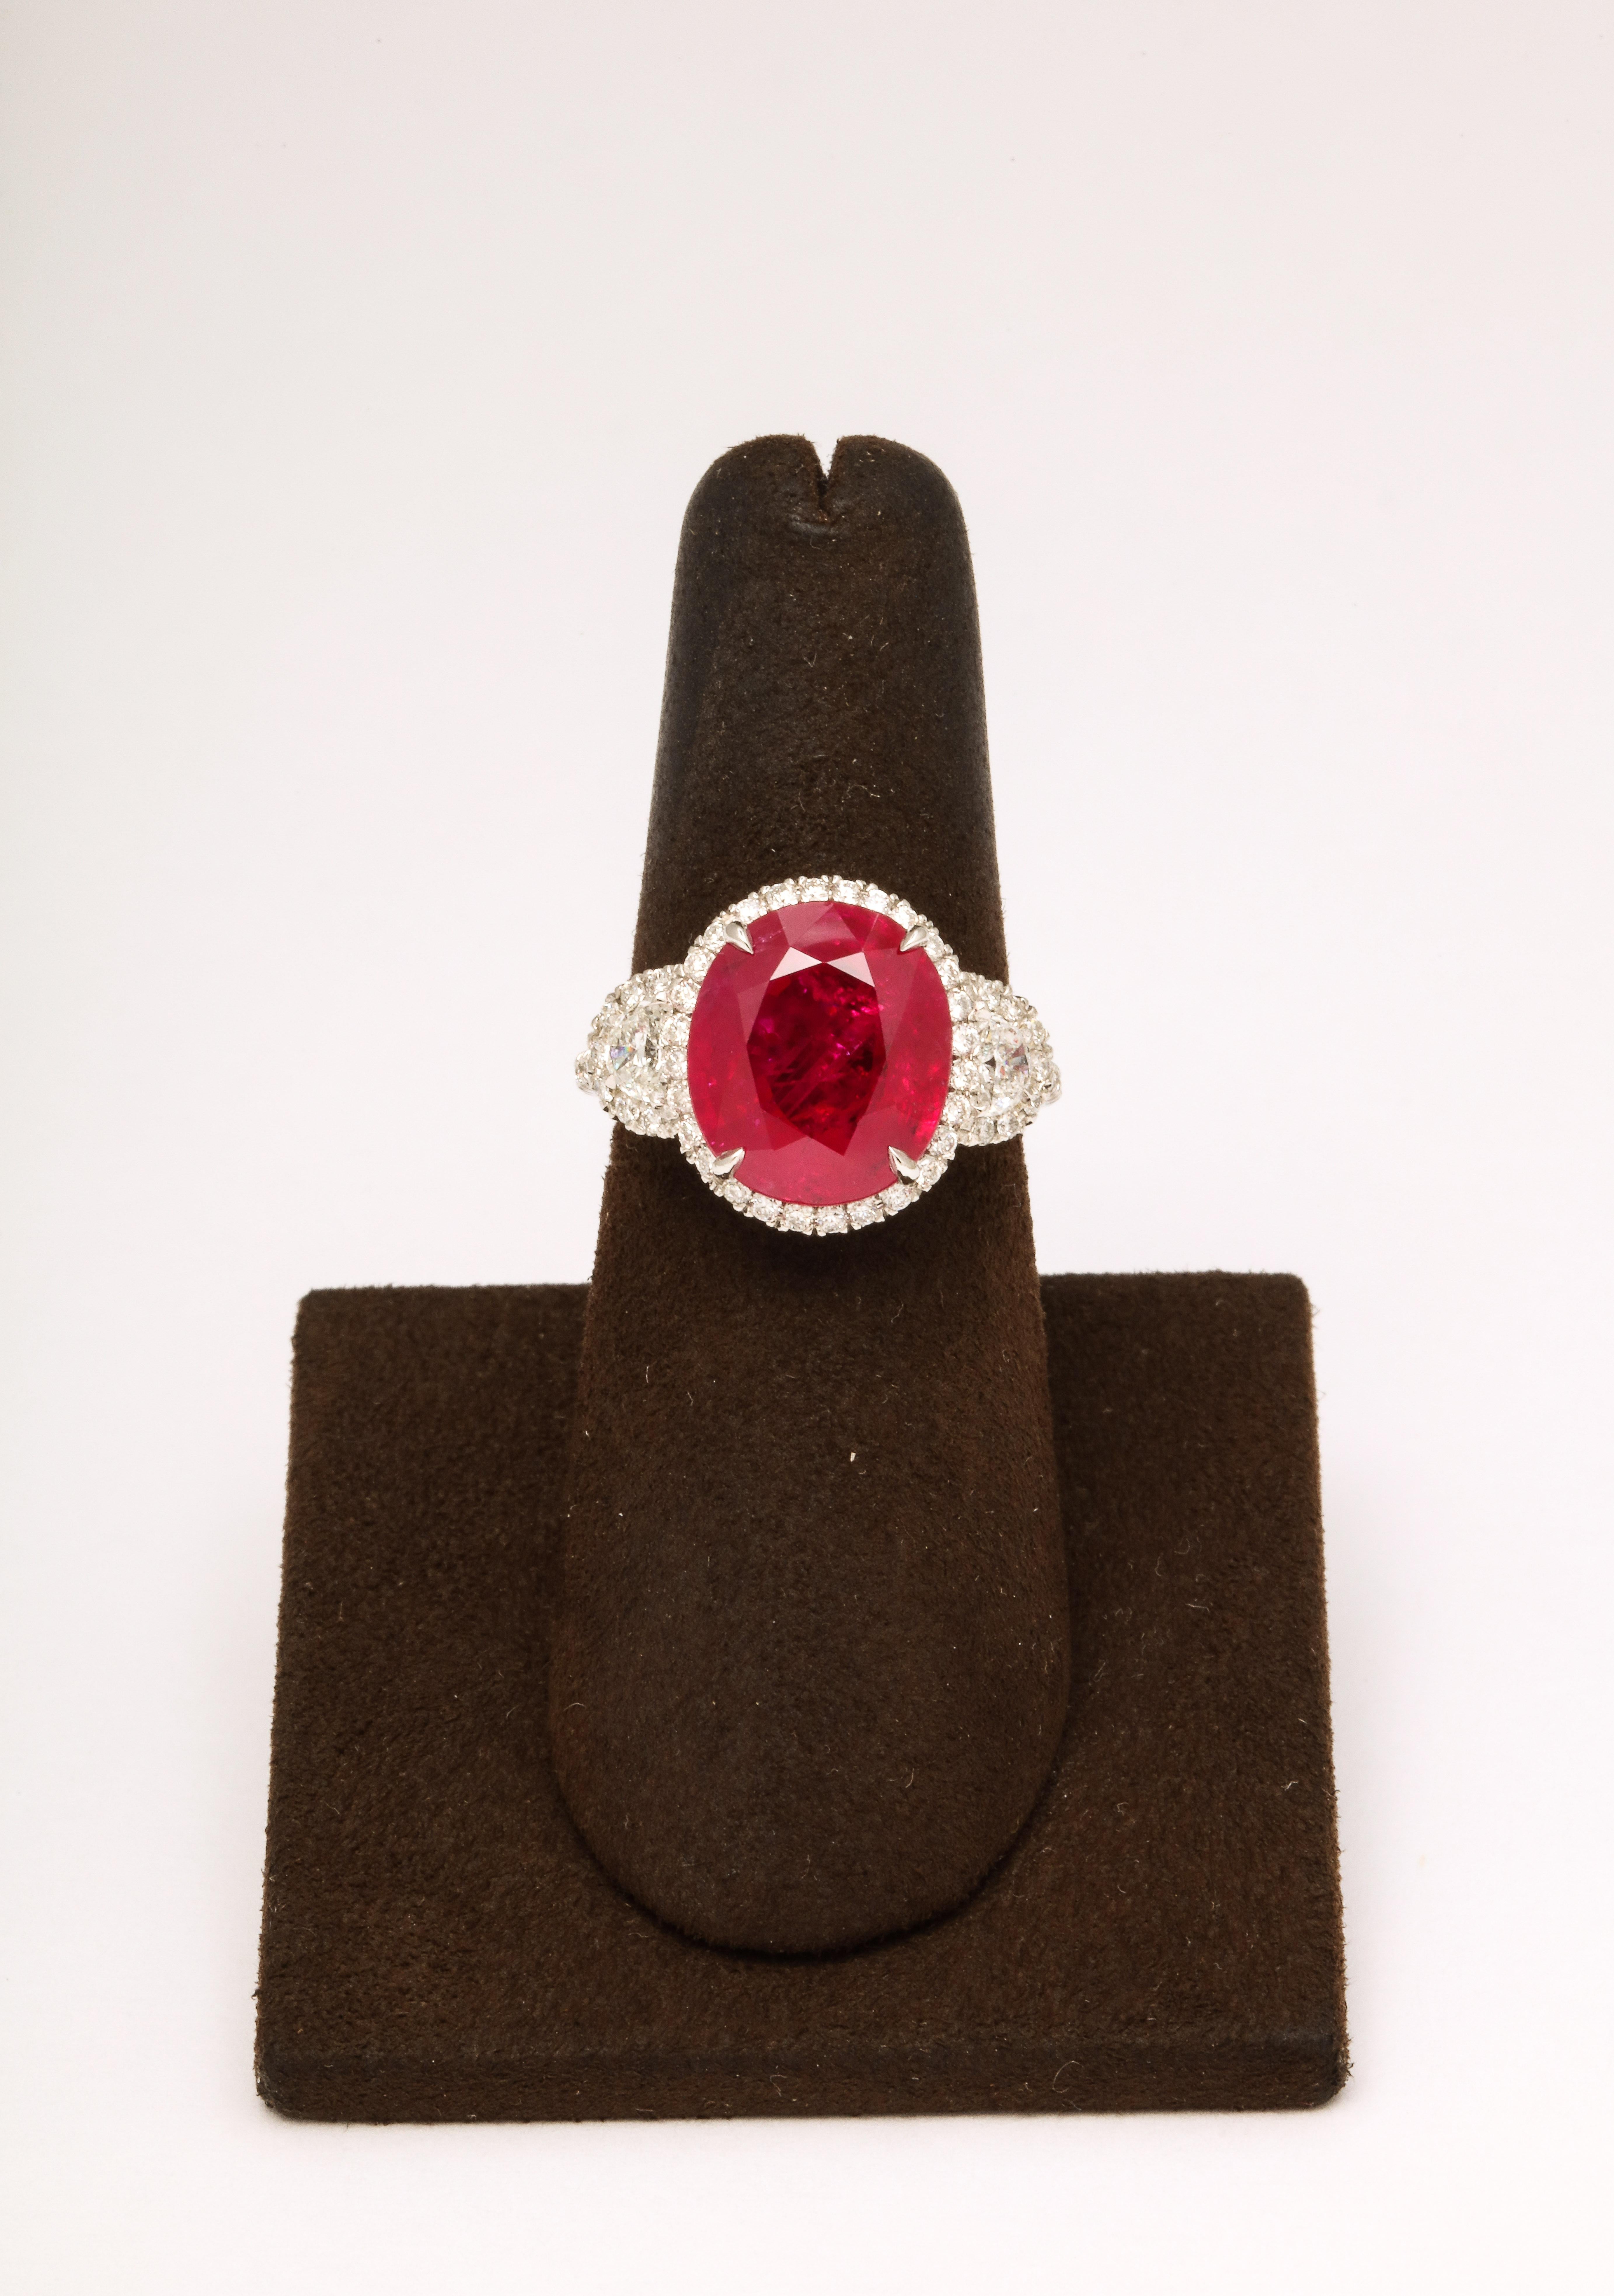 
7.18 carat Certified Burma Ruby 

Set in a custom platinum and diamond mounting featuring 1.01 carats of white round and half moon cut diamonds. 

A fabulous ring with exceptional color. 

Currently a size 6, this ring can easily be sized to any